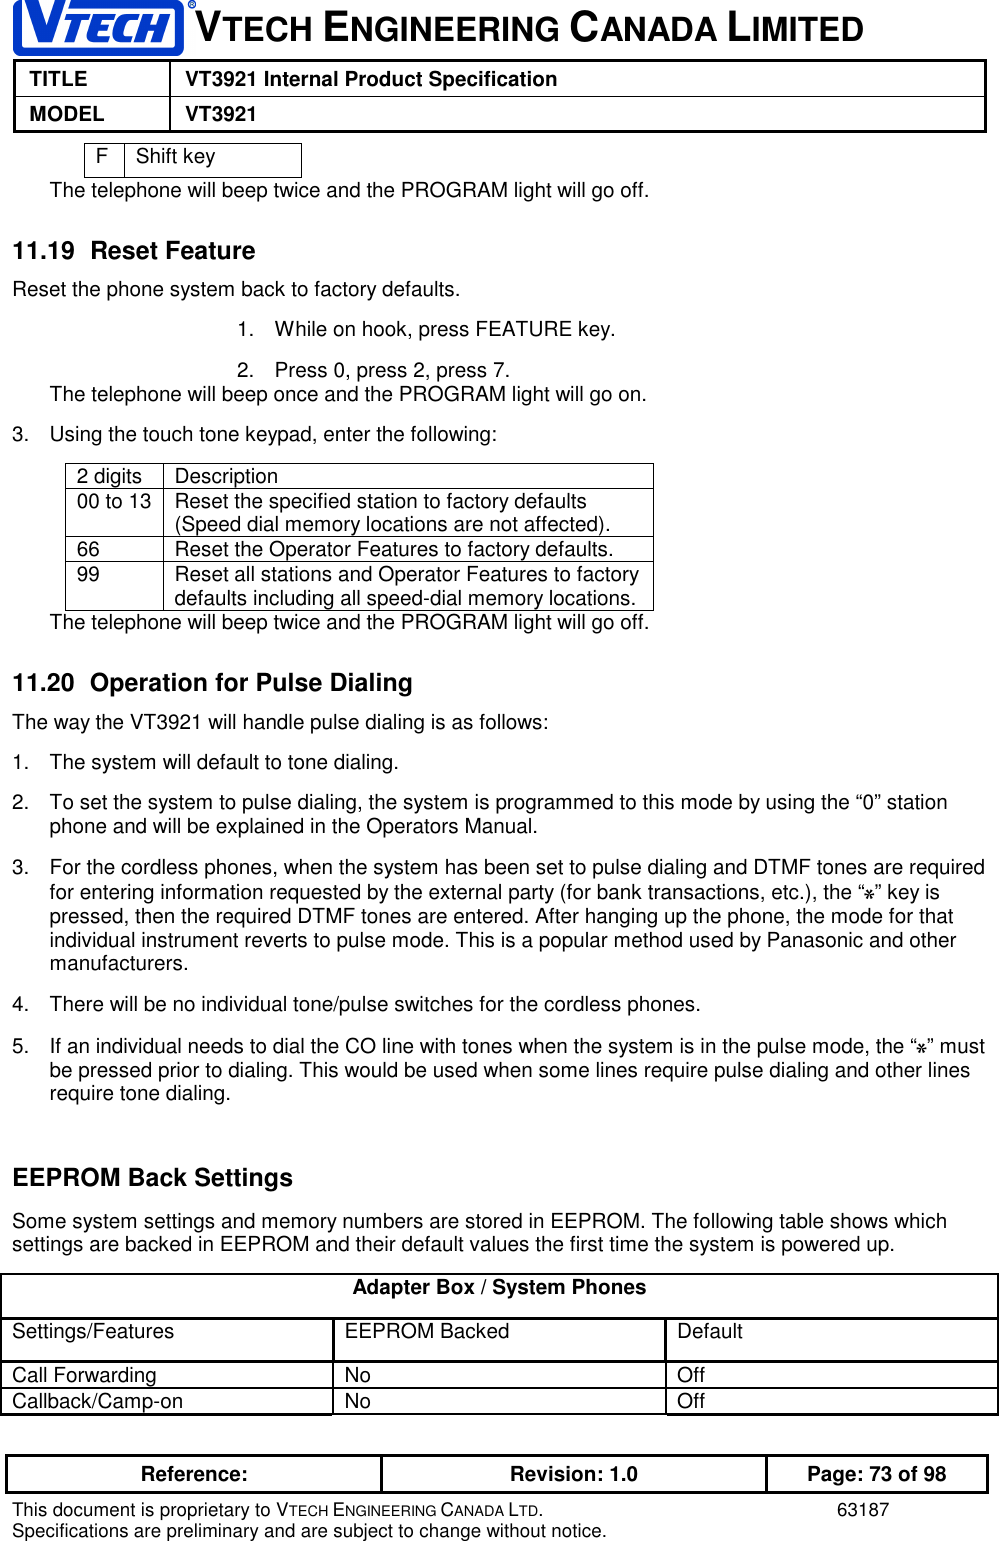 VTECH ENGINEERING CANADA LIMITEDTITLE VT3921 Internal Product SpecificationMODEL VT3921Reference: Revision: 1.0 Page: 73 of 98This document is proprietary to VTECH ENGINEERING CANADA LTD. 63187Specifications are preliminary and are subject to change without notice.FShift keyThe telephone will beep twice and the PROGRAM light will go off.11.19 Reset FeatureReset the phone system back to factory defaults.1.  While on hook, press FEATURE key.2.  Press 0, press 2, press 7.The telephone will beep once and the PROGRAM light will go on.3.  Using the touch tone keypad, enter the following:2 digits Description00 to 13 Reset the specified station to factory defaults(Speed dial memory locations are not affected).66 Reset the Operator Features to factory defaults.99 Reset all stations and Operator Features to factorydefaults including all speed-dial memory locations.The telephone will beep twice and the PROGRAM light will go off.11.20  Operation for Pulse DialingThe way the VT3921 will handle pulse dialing is as follows:1.  The system will default to tone dialing.2.  To set the system to pulse dialing, the system is programmed to this mode by using the “0” stationphone and will be explained in the Operators Manual.3.  For the cordless phones, when the system has been set to pulse dialing and DTMF tones are requiredfor entering information requested by the external party (for bank transactions, etc.), the “0” key ispressed, then the required DTMF tones are entered. After hanging up the phone, the mode for thatindividual instrument reverts to pulse mode. This is a popular method used by Panasonic and othermanufacturers.4.  There will be no individual tone/pulse switches for the cordless phones.5.  If an individual needs to dial the CO line with tones when the system is in the pulse mode, the “0” mustbe pressed prior to dialing. This would be used when some lines require pulse dialing and other linesrequire tone dialing.EEPROM Back SettingsSome system settings and memory numbers are stored in EEPROM. The following table shows whichsettings are backed in EEPROM and their default values the first time the system is powered up.Adapter Box / System PhonesSettings/Features EEPROM Backed DefaultCall Forwarding No OffCallback/Camp-on No Off